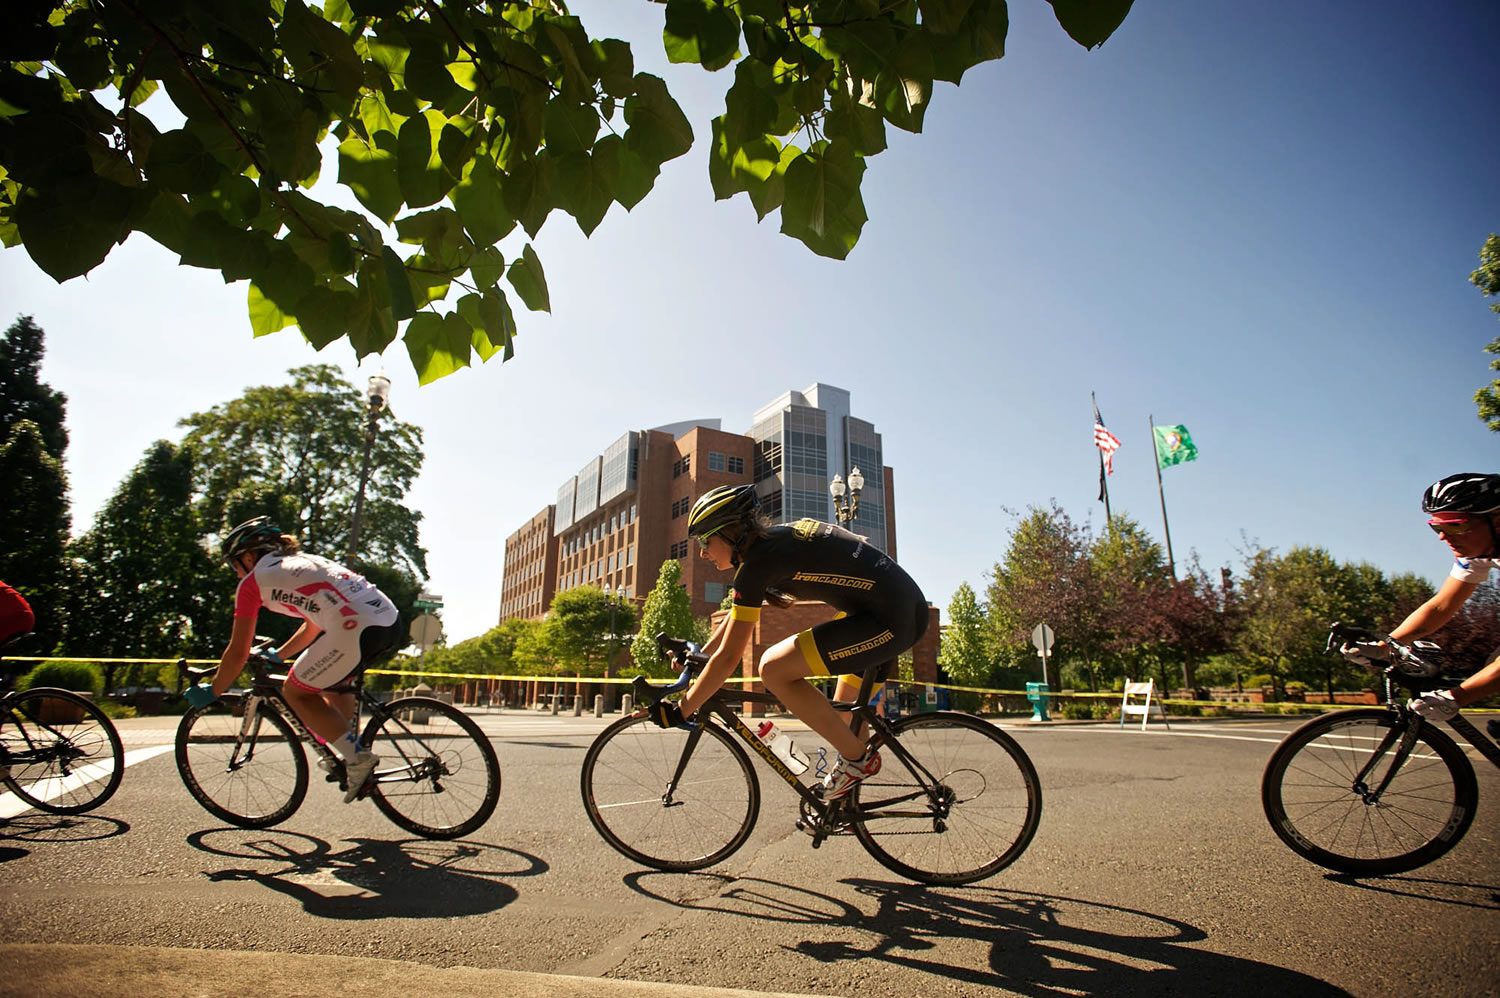 The Vancouver Courthouse Criterium features nine racing divisions, including two for women. Portland's Amy Campbell, in white, won the Senior Women's category.